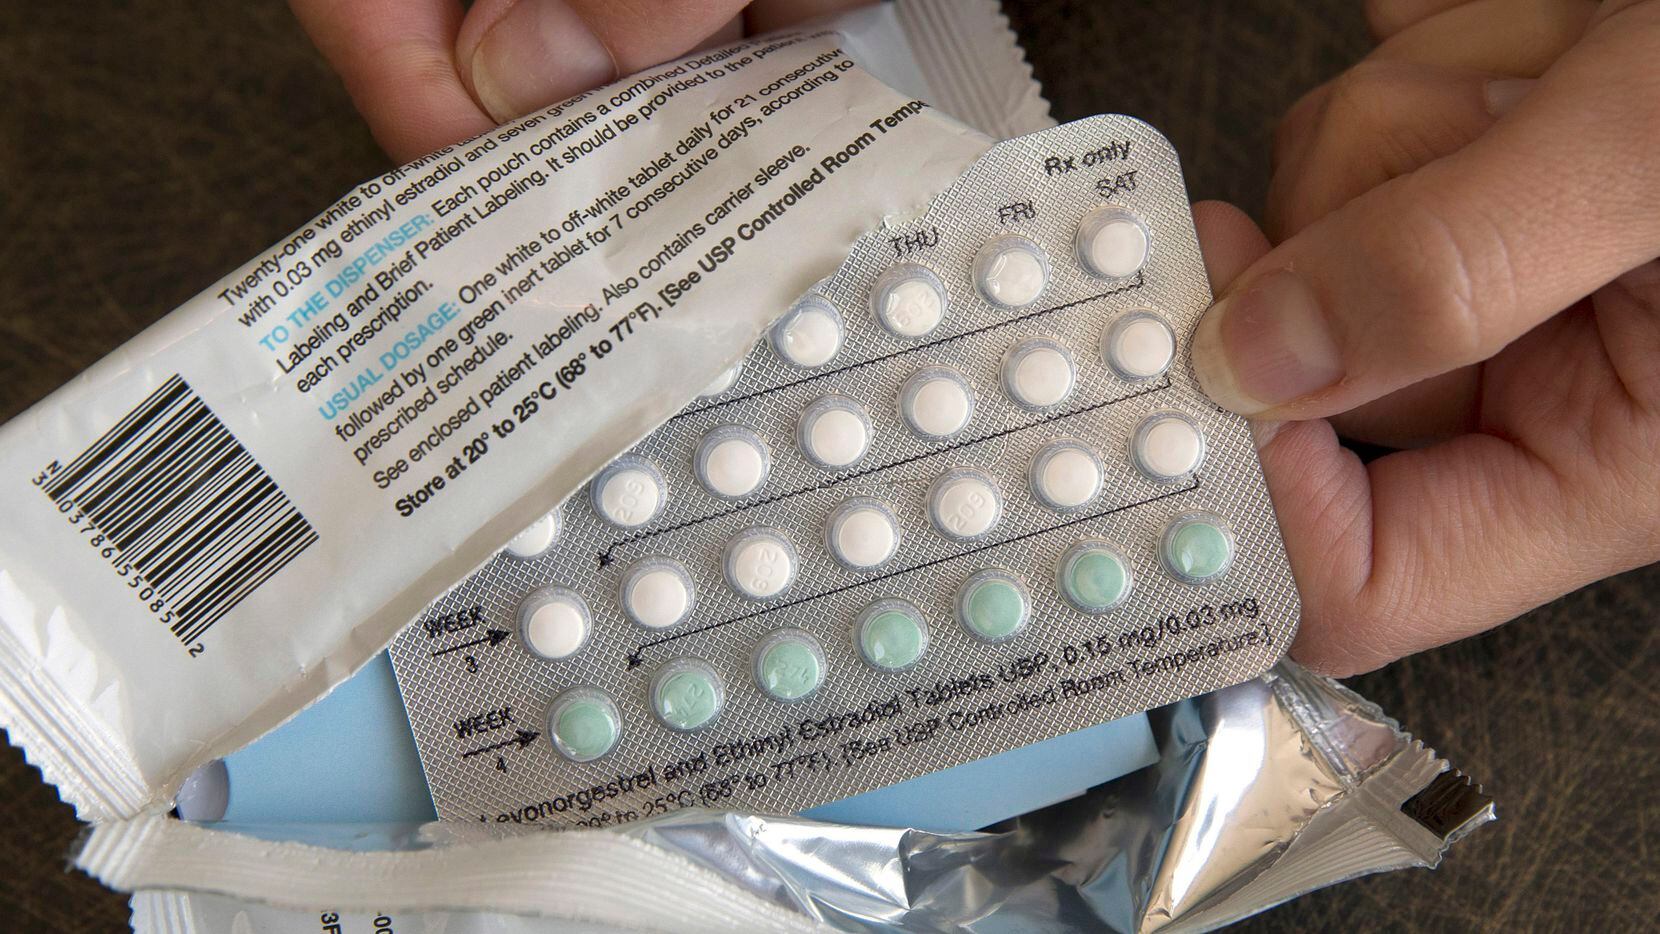 A federal judge's ruling has stopped Title X clinics in Texas from prescribing birth control...